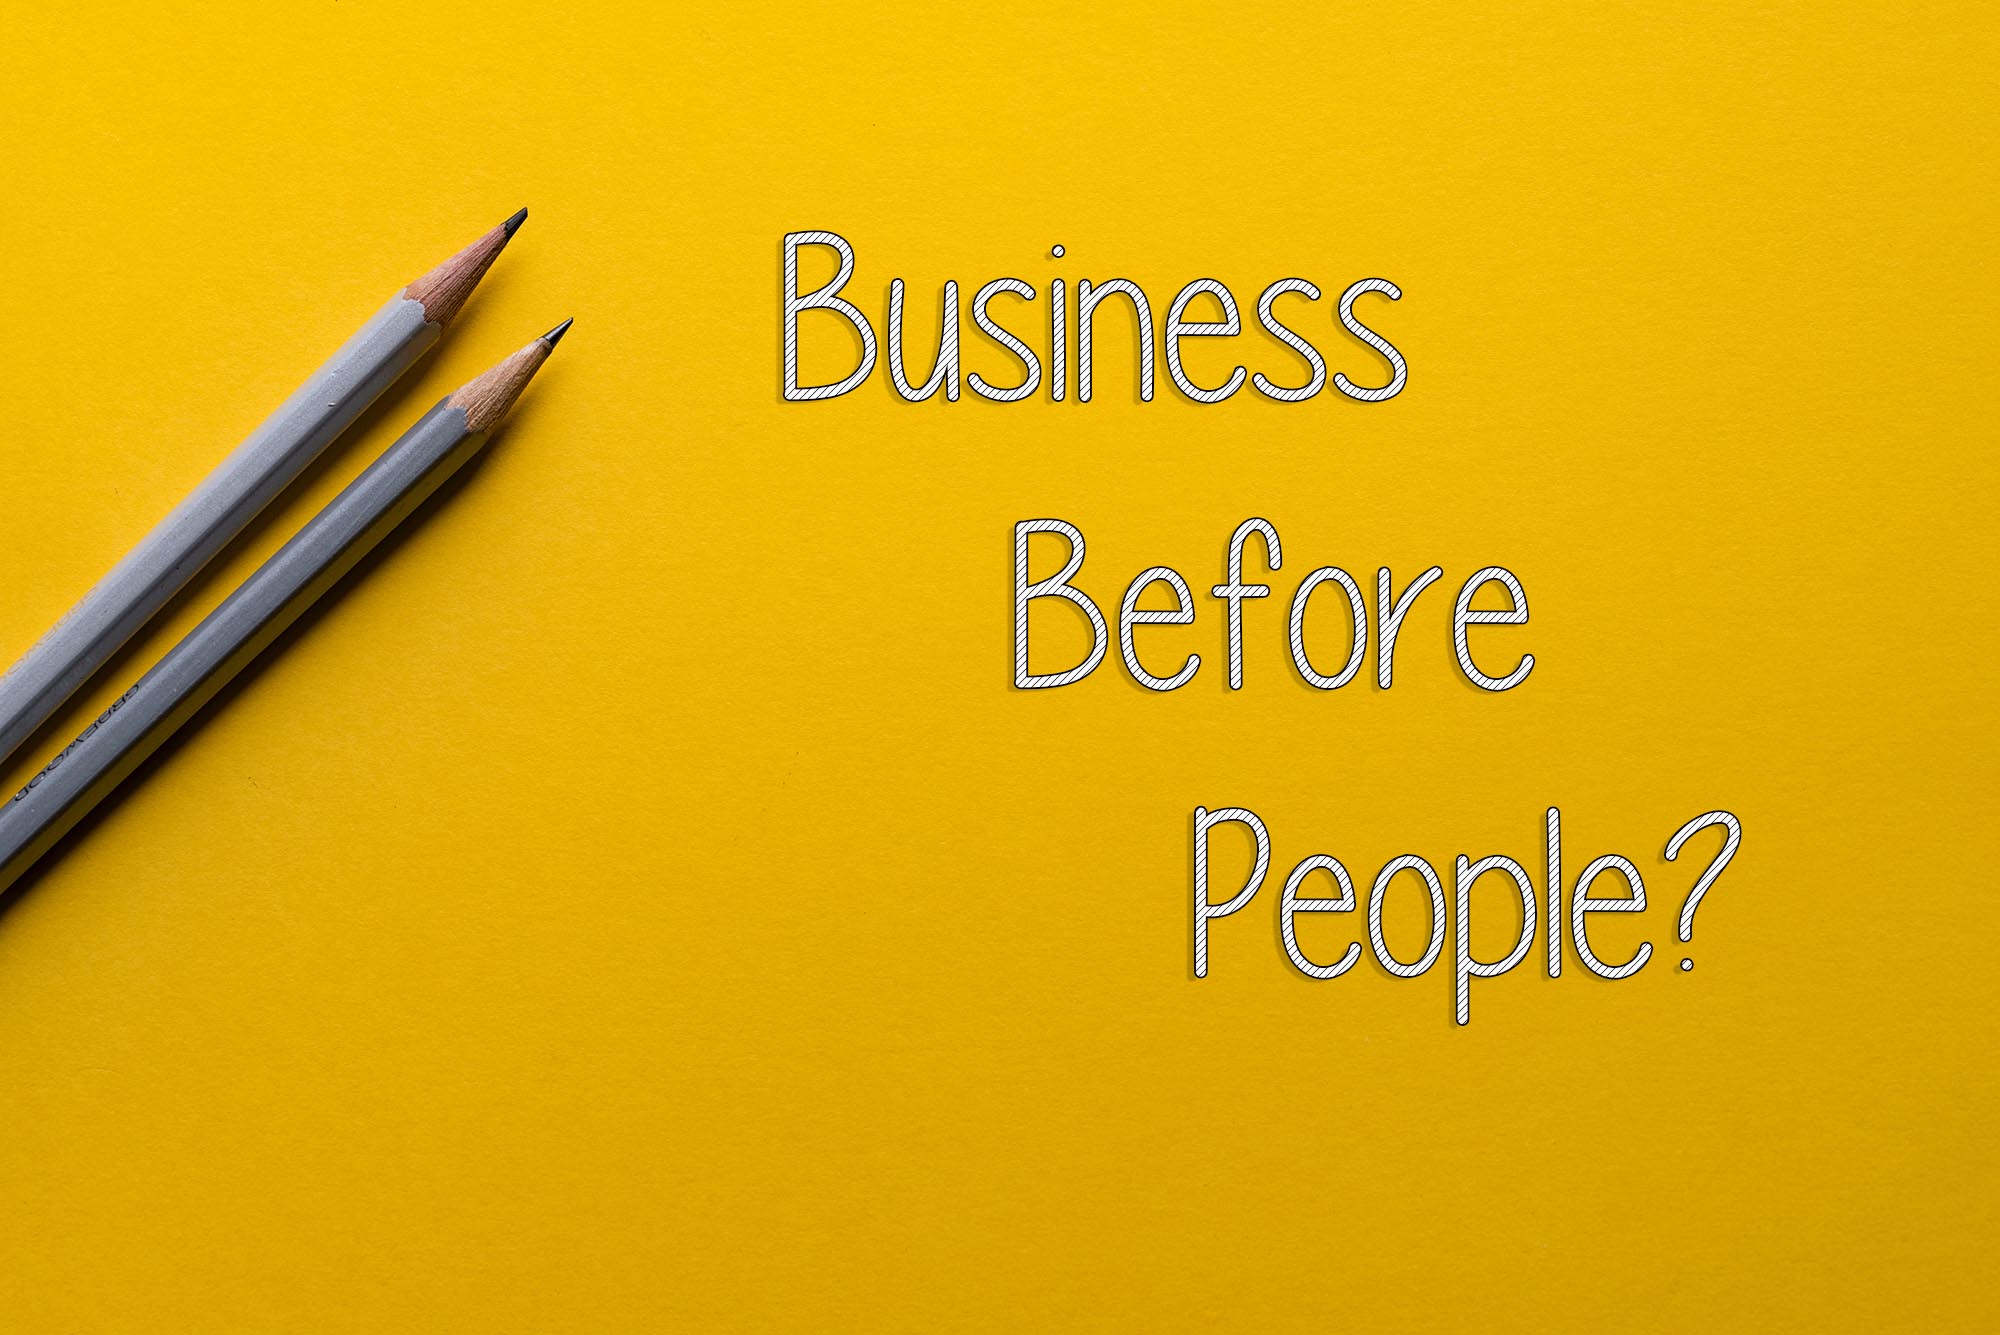 Business before people??